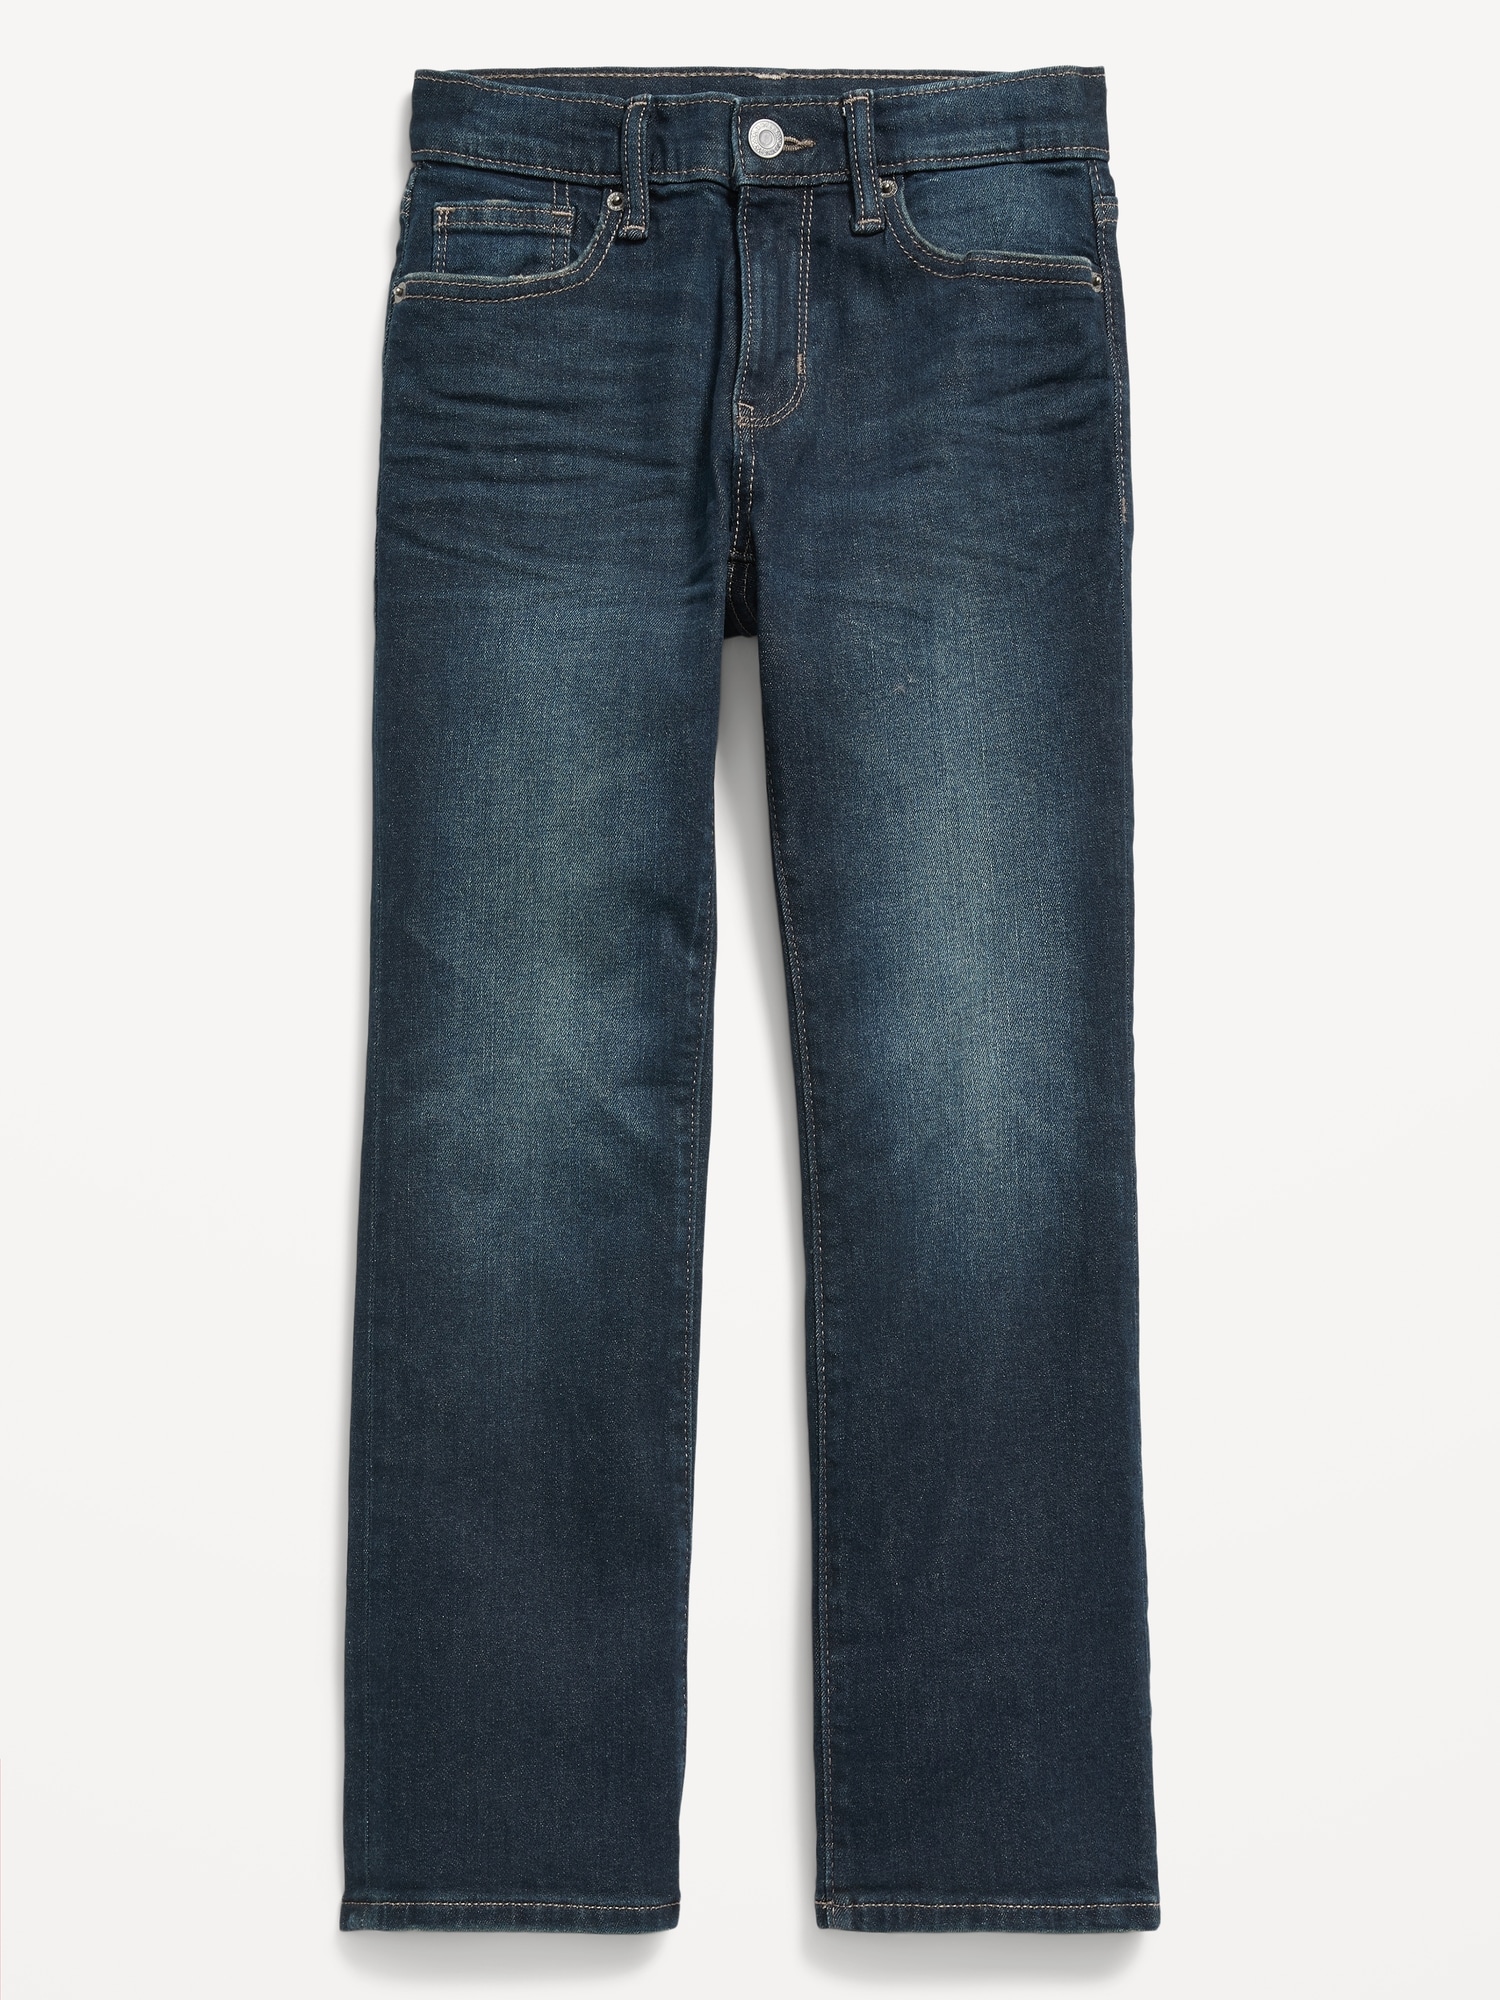 214 City Trouser Jeans In Medium Wash | Stetson